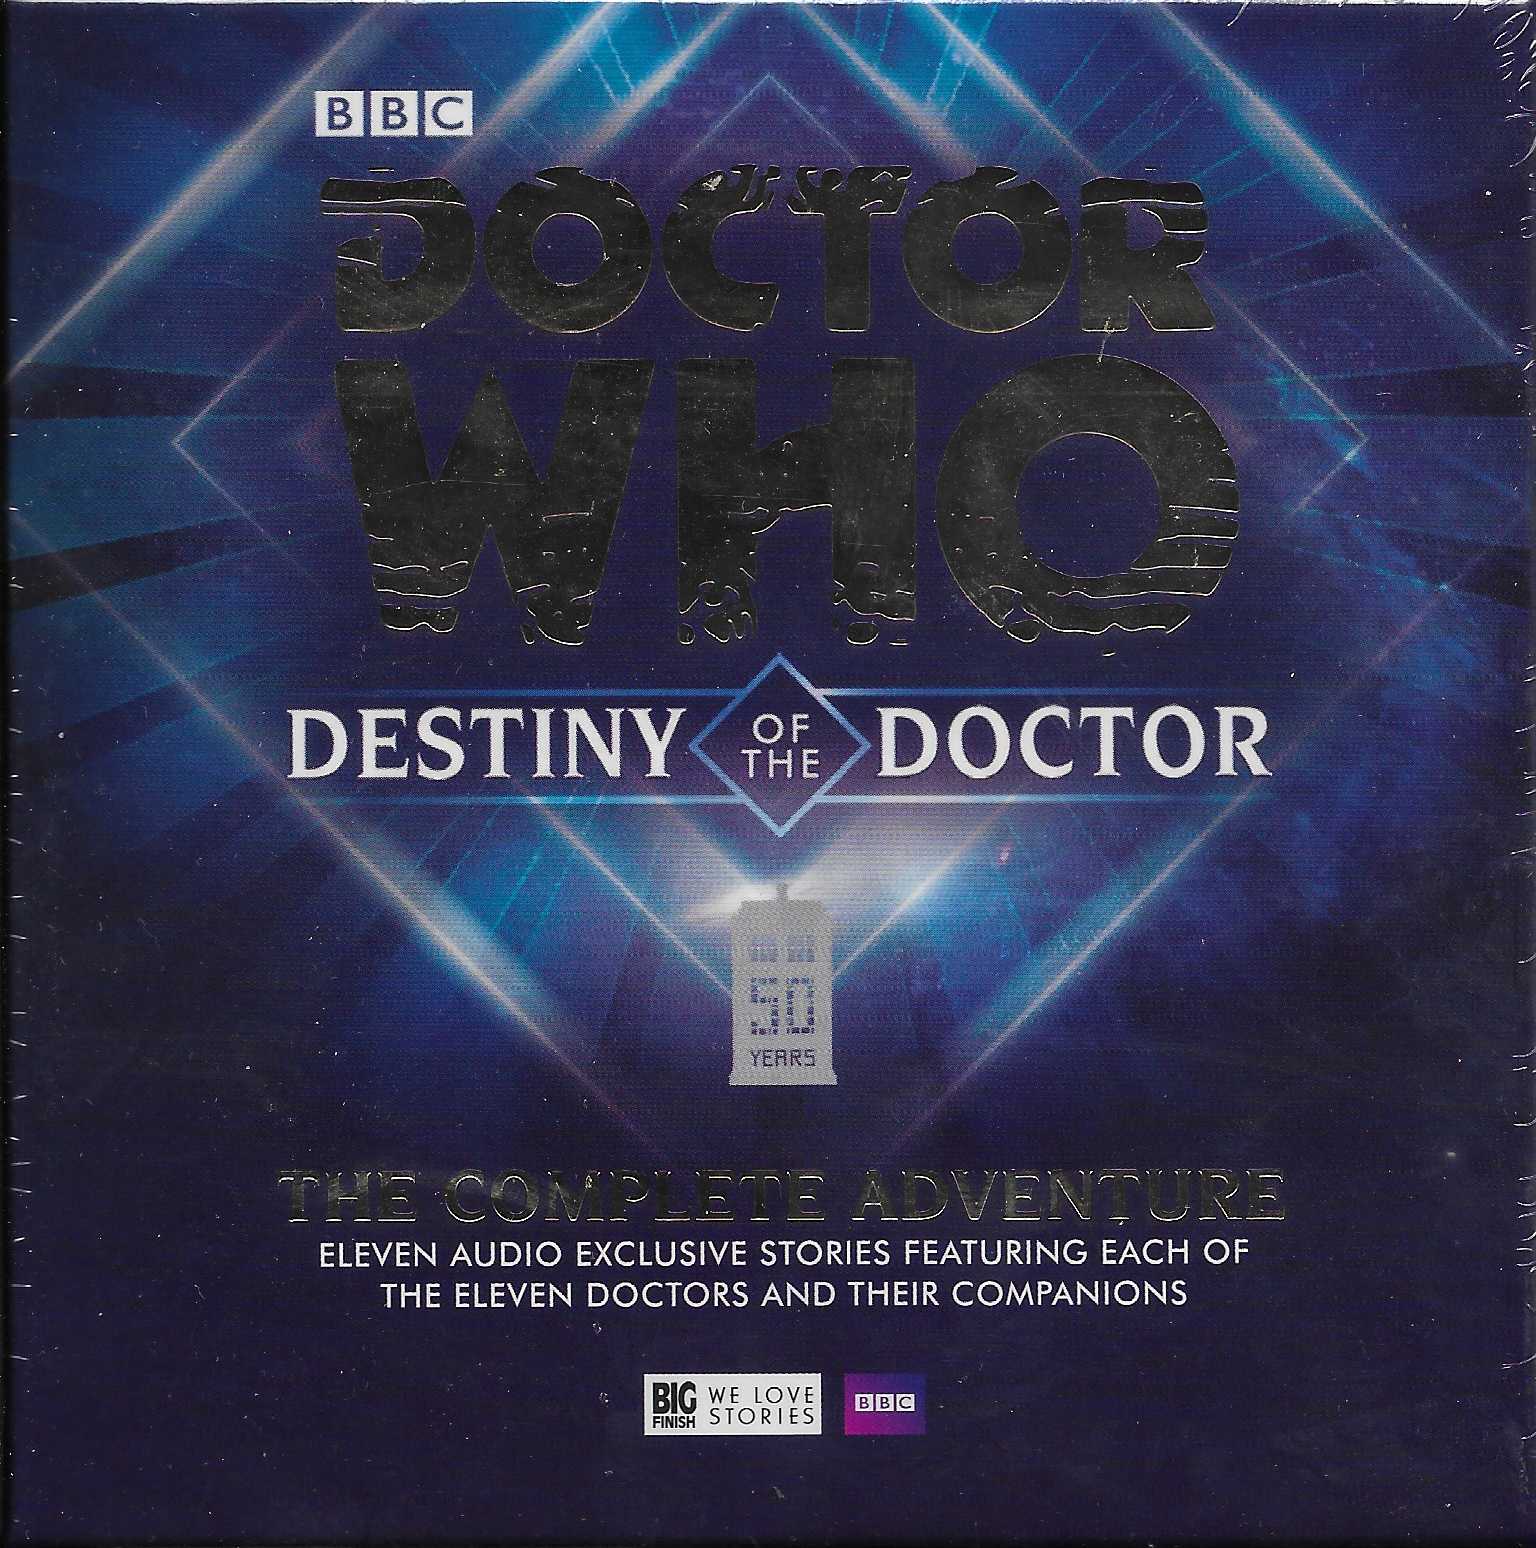 Picture of ISBN 978-1-78575-451-7 Doctor Who - Destiny of the Doctor by artist Various from the BBC records and Tapes library